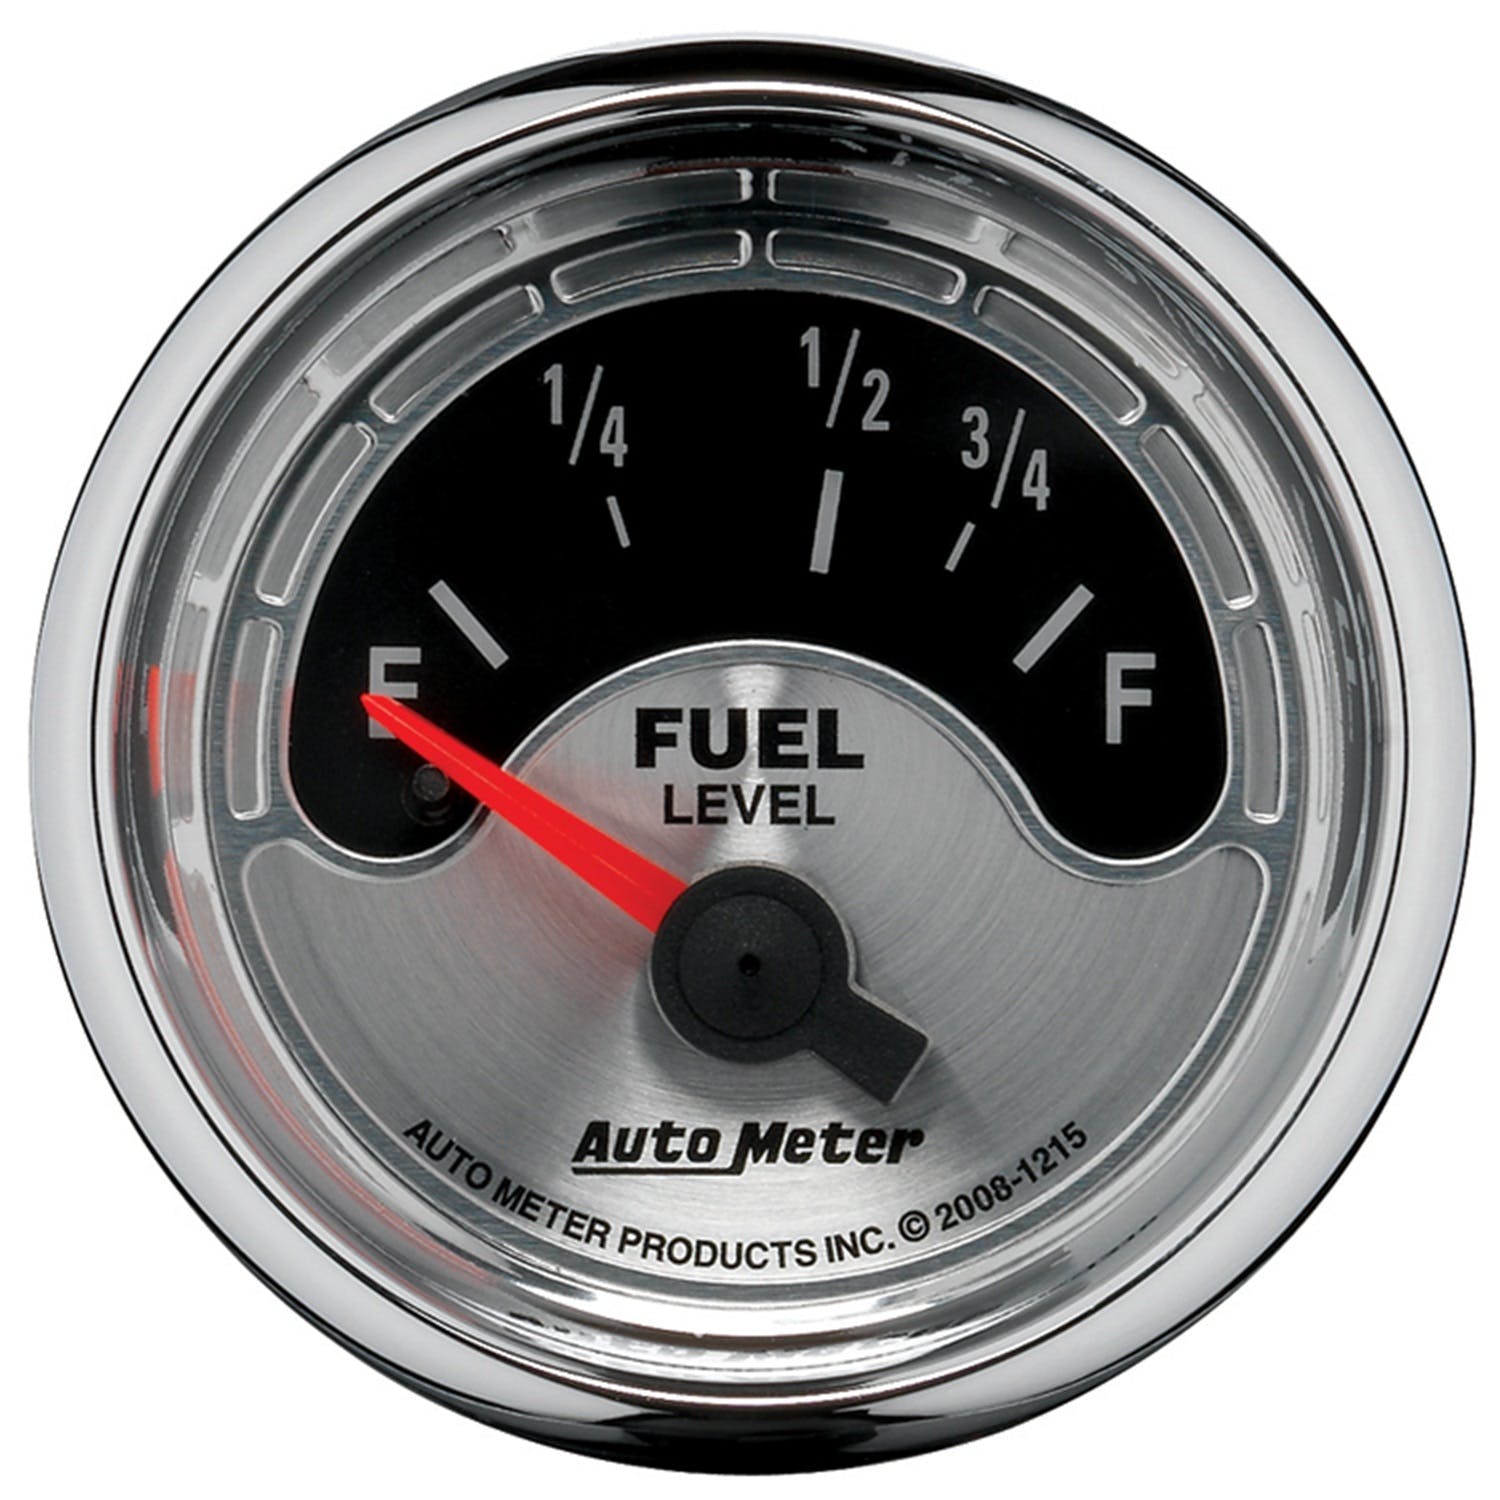 AutoMeter Products 1215 American Muscle Series Fuel Level Gauge (73-10ohm, 2-1/16 in.)